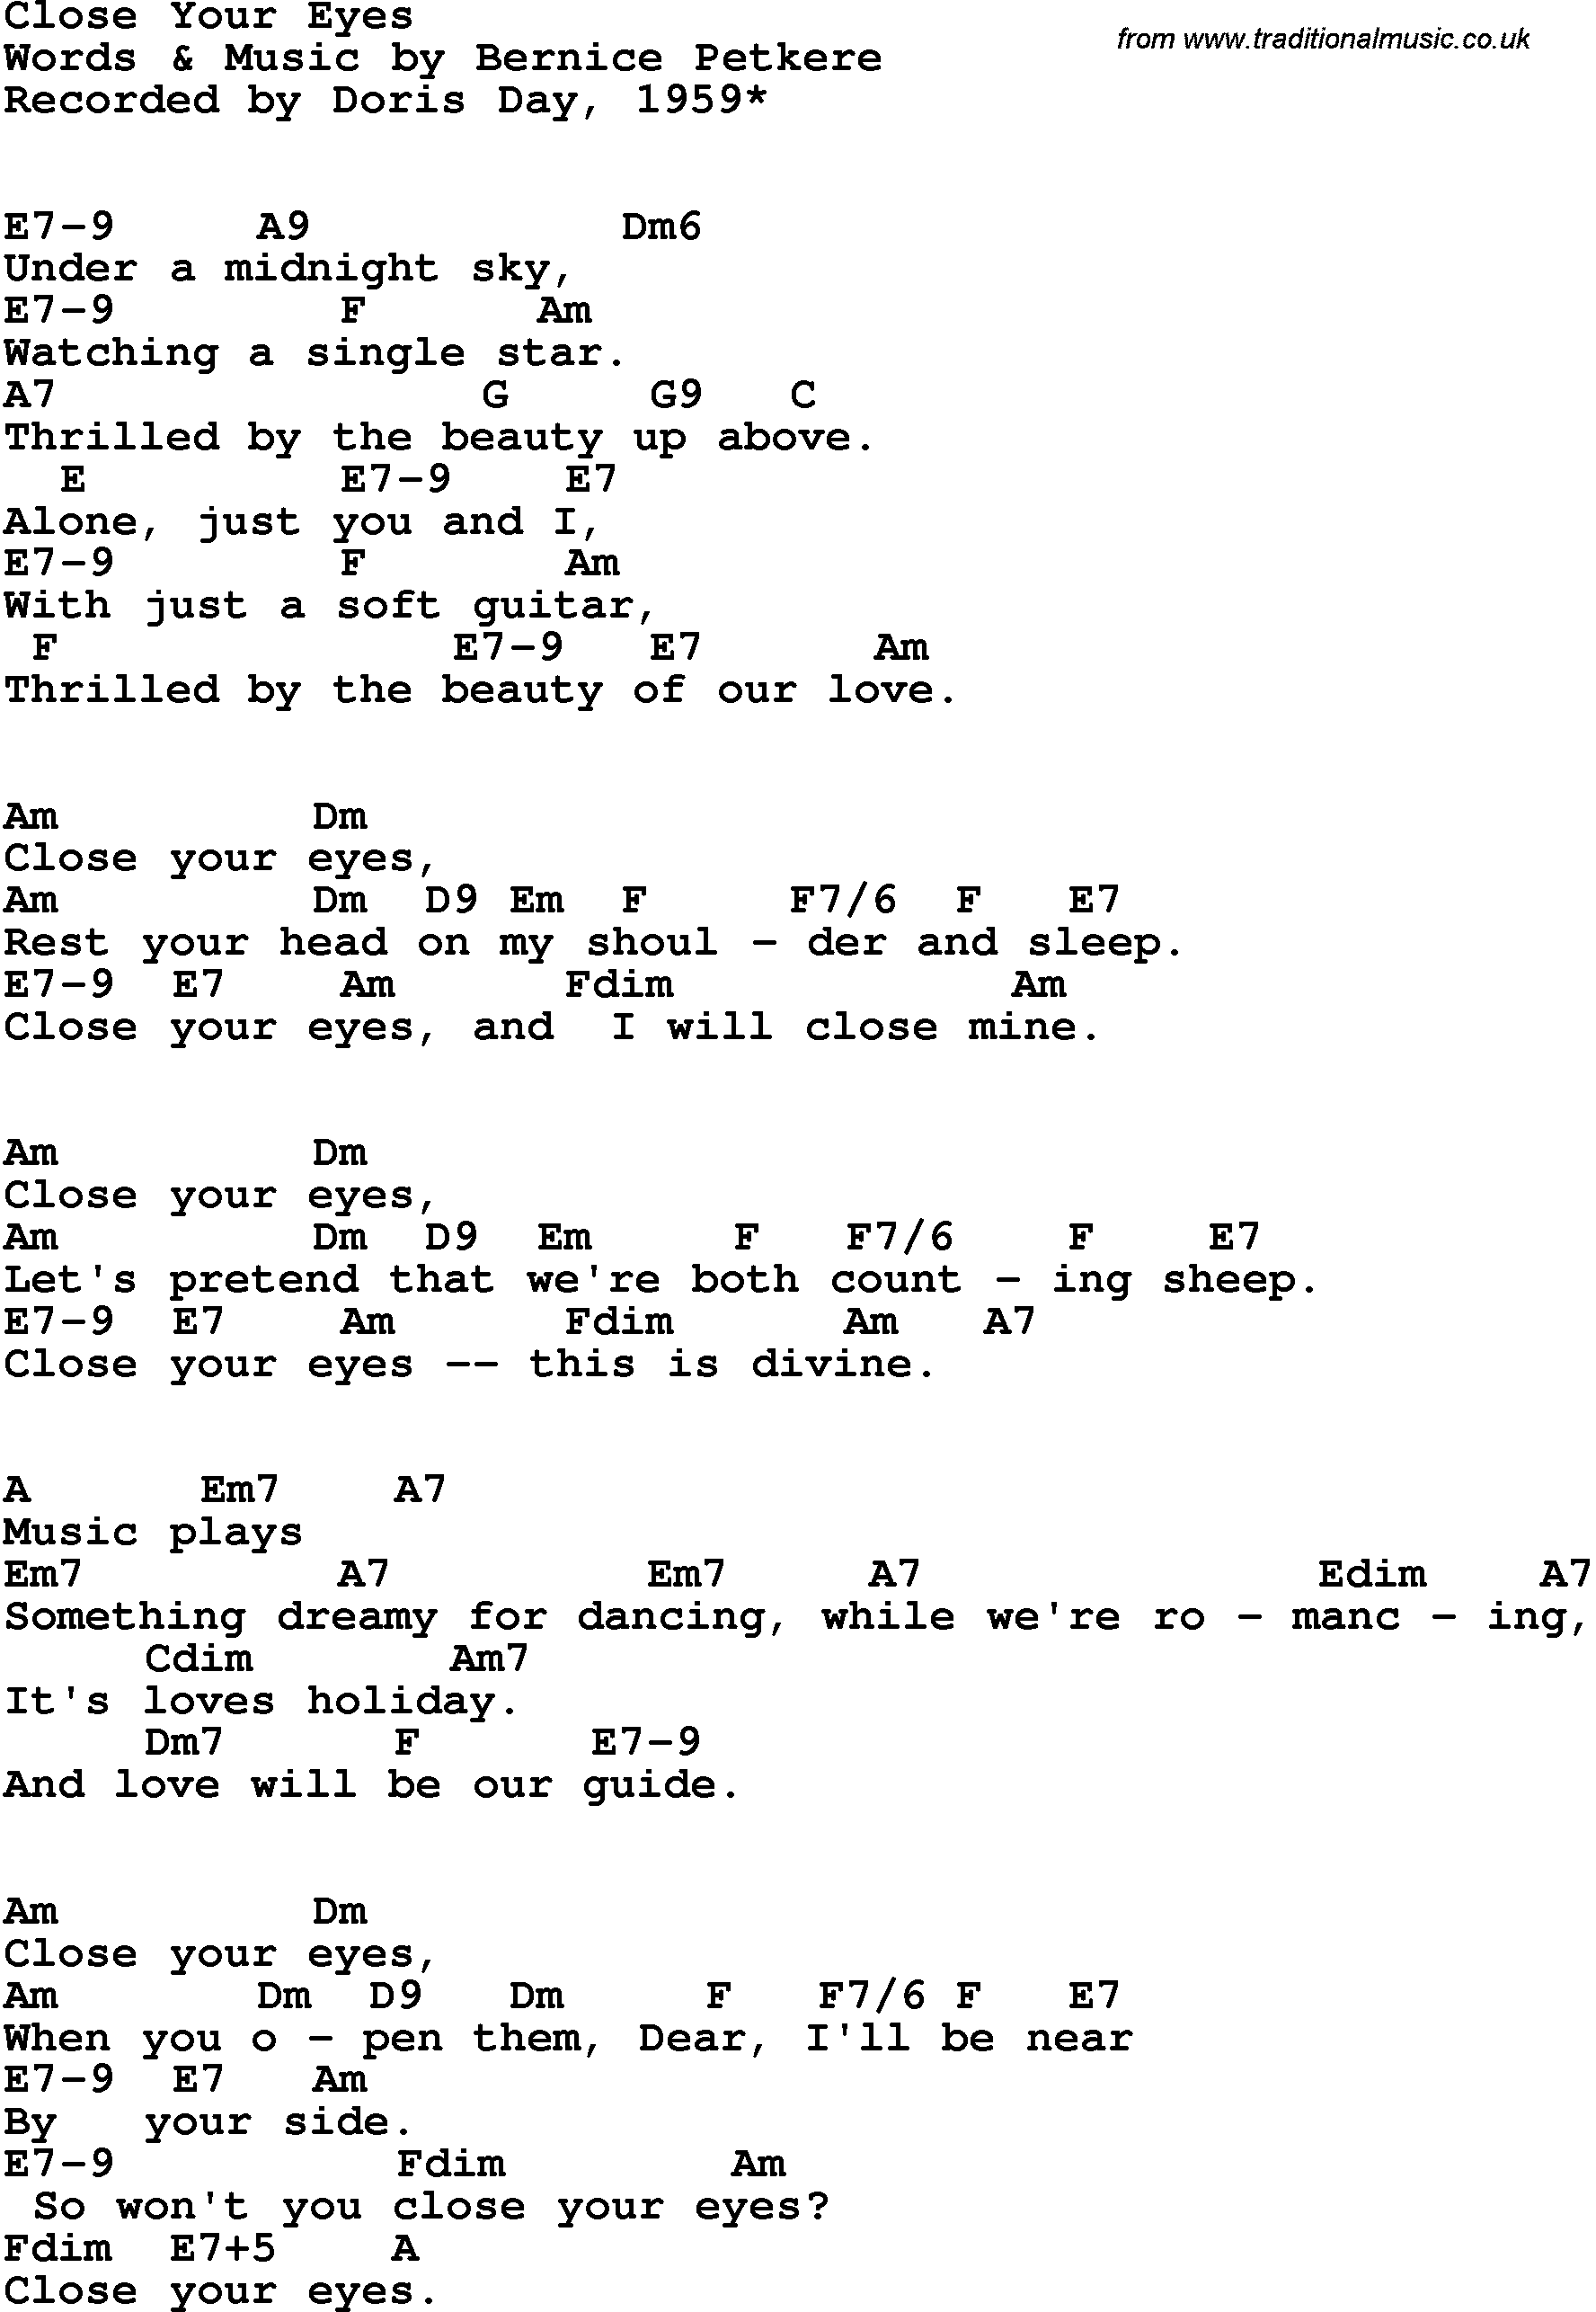 Song Lyrics with guitar chords for Close Your Eyes - Doris Day, 1959